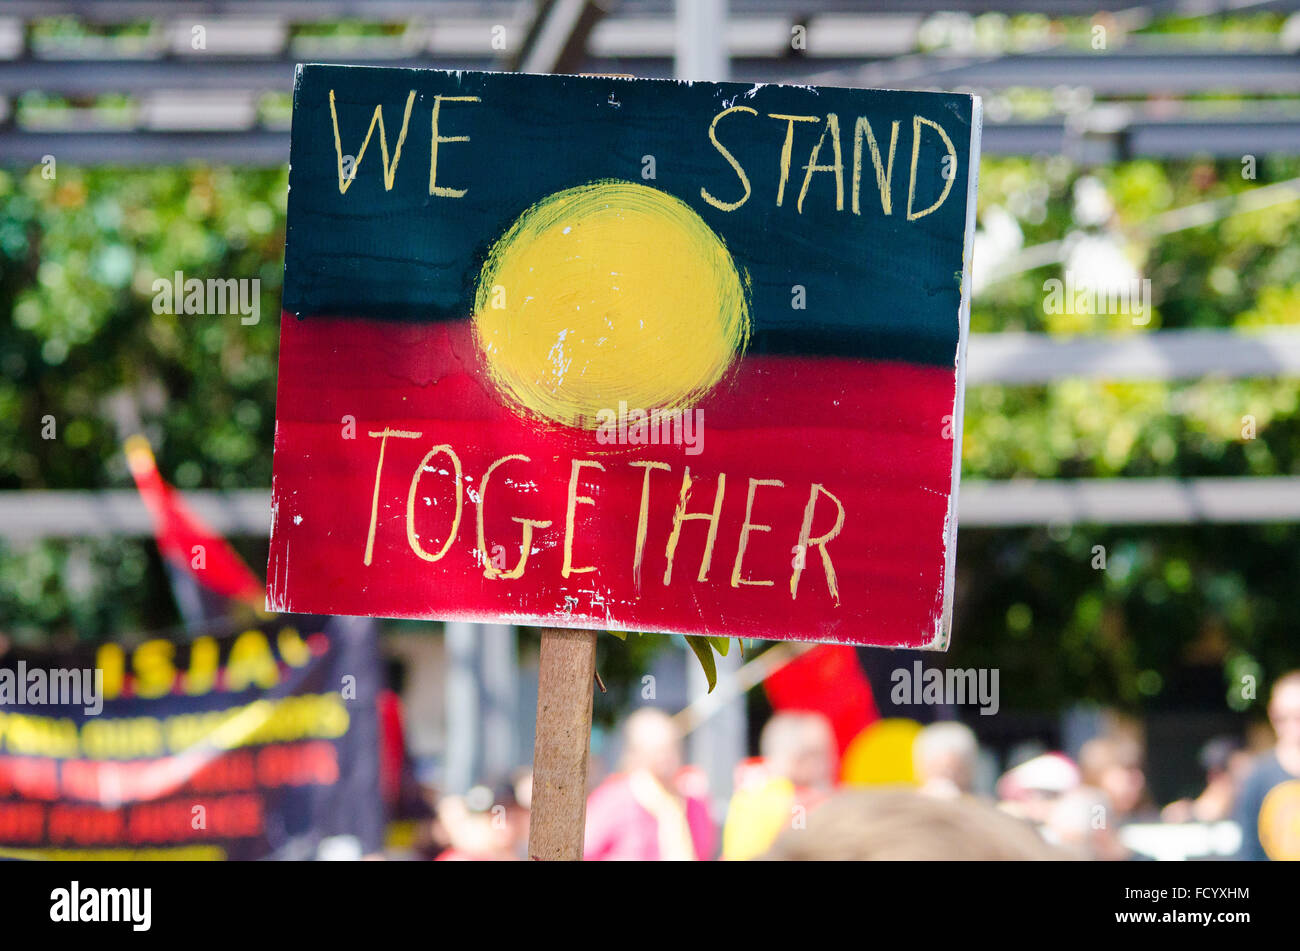 Sydney, Australia. 26th January, 2016. The Sydney Invasion Day March Protest brought together Aboriginal people and supporters voicing their opinions about Aboriginal land / culture. The march started at The Block in Redfern and then moved to Sydney's Town Hall. The date is also celebrated as Australia Day marking the arrival of the First Fleet. Credit:  mjmediabox/Alamy Live News Stock Photo